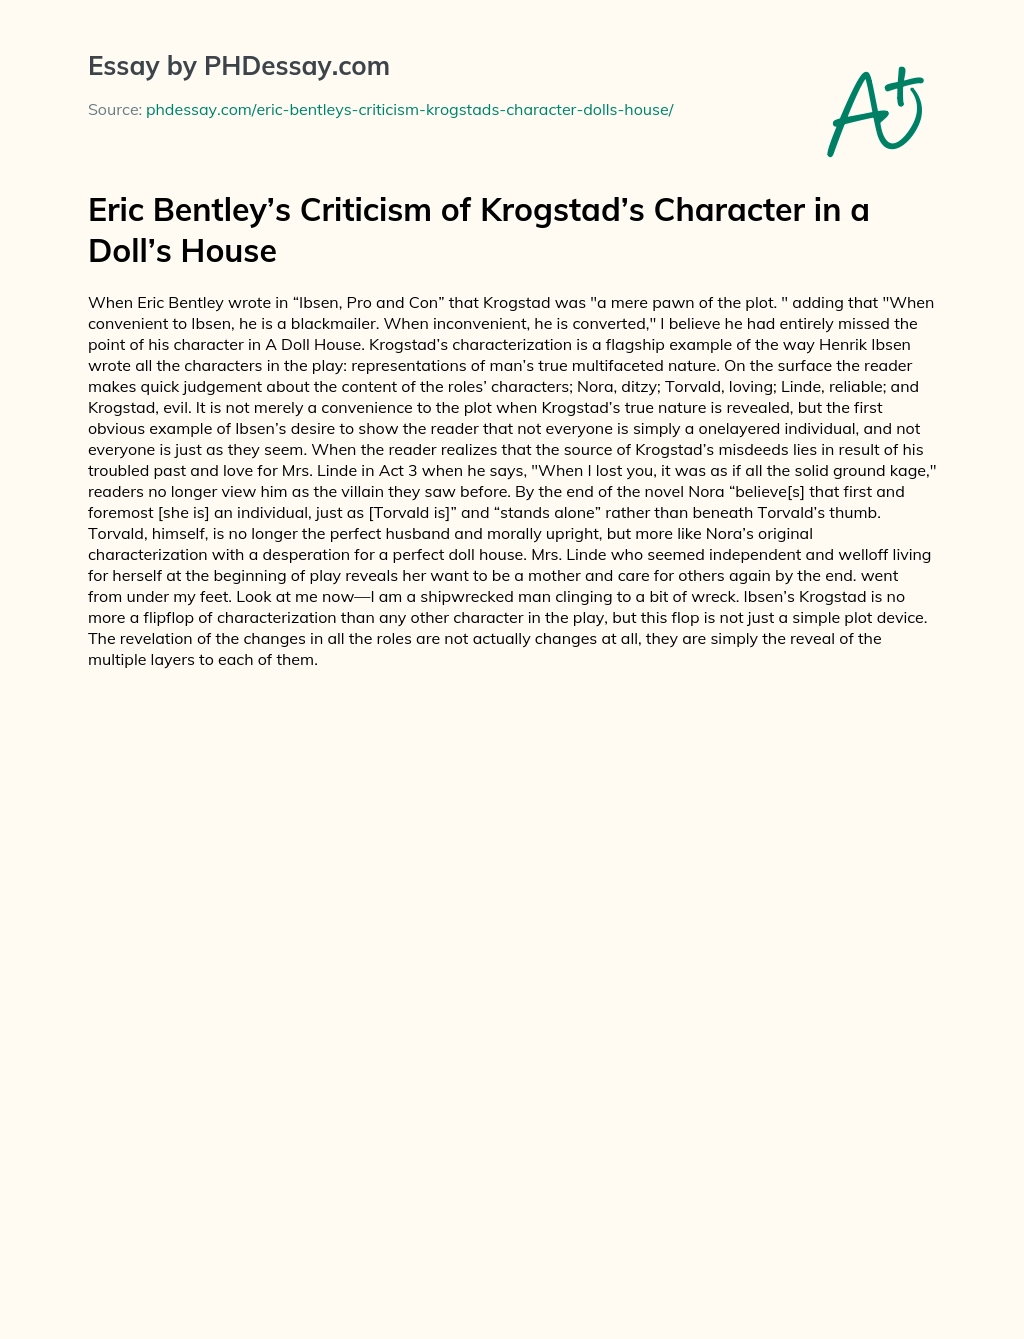 Eric Bentley’s Criticism of Krogstad’s Character in a Doll’s House essay